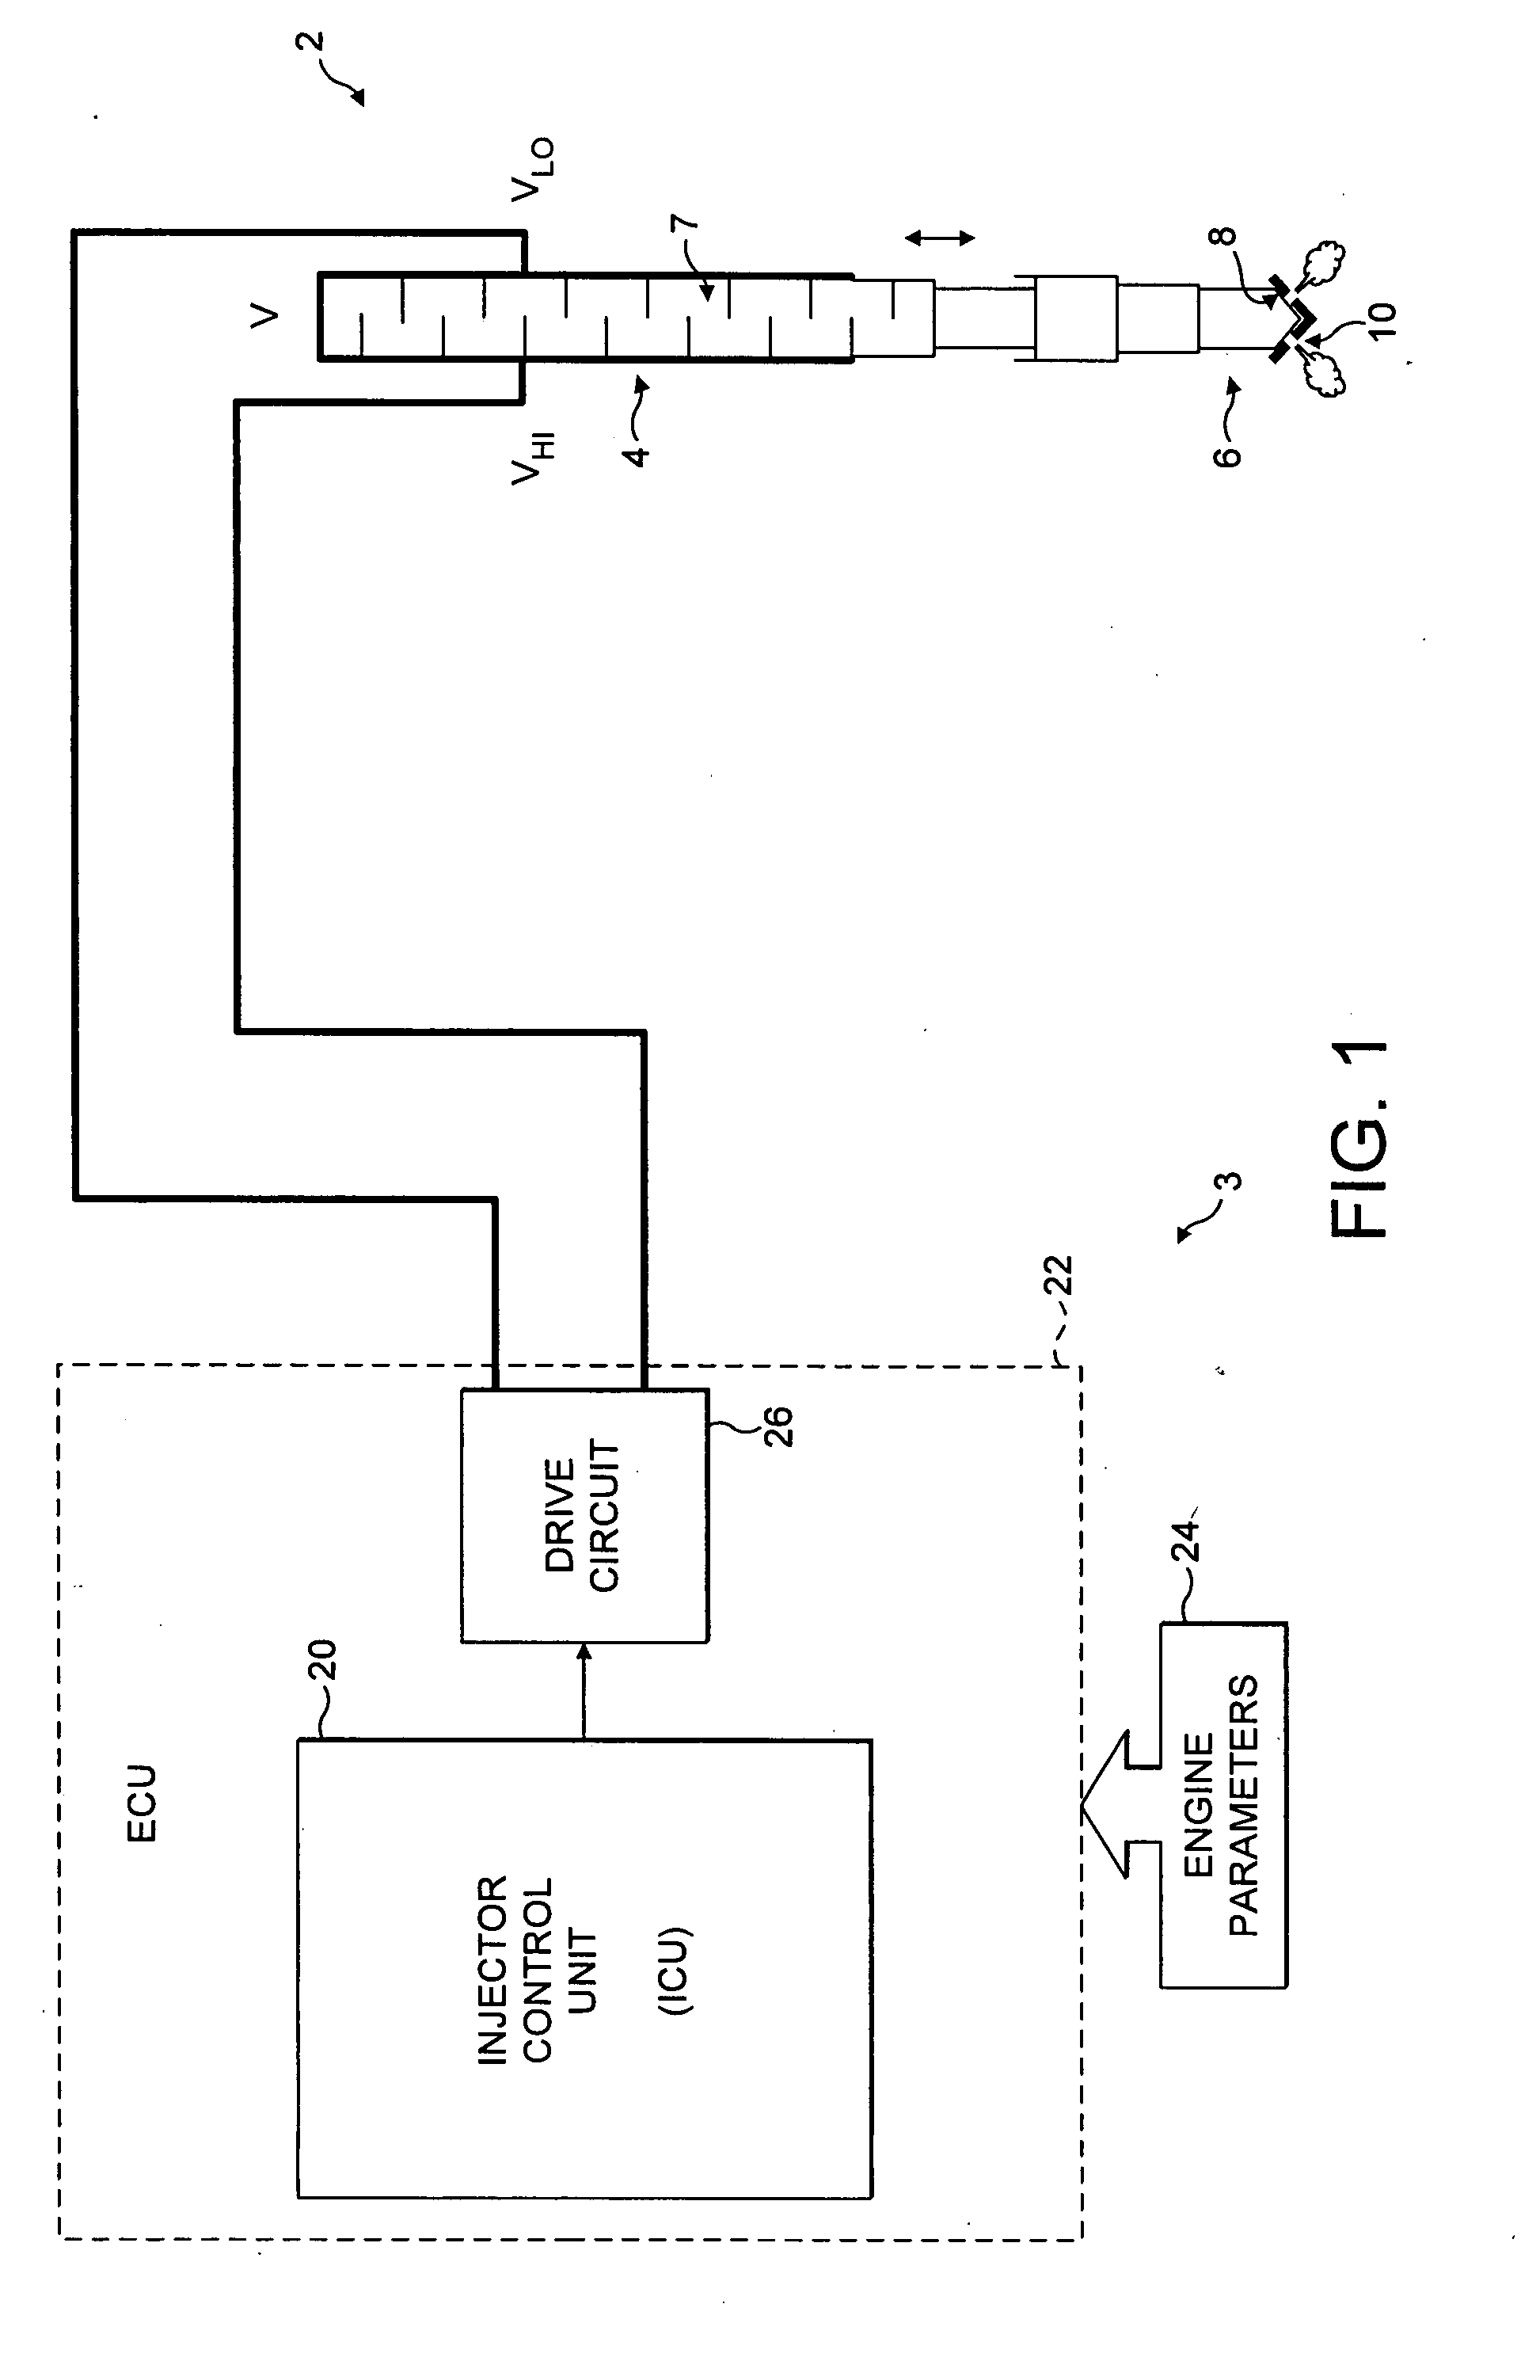 Method of operating a fuel injector